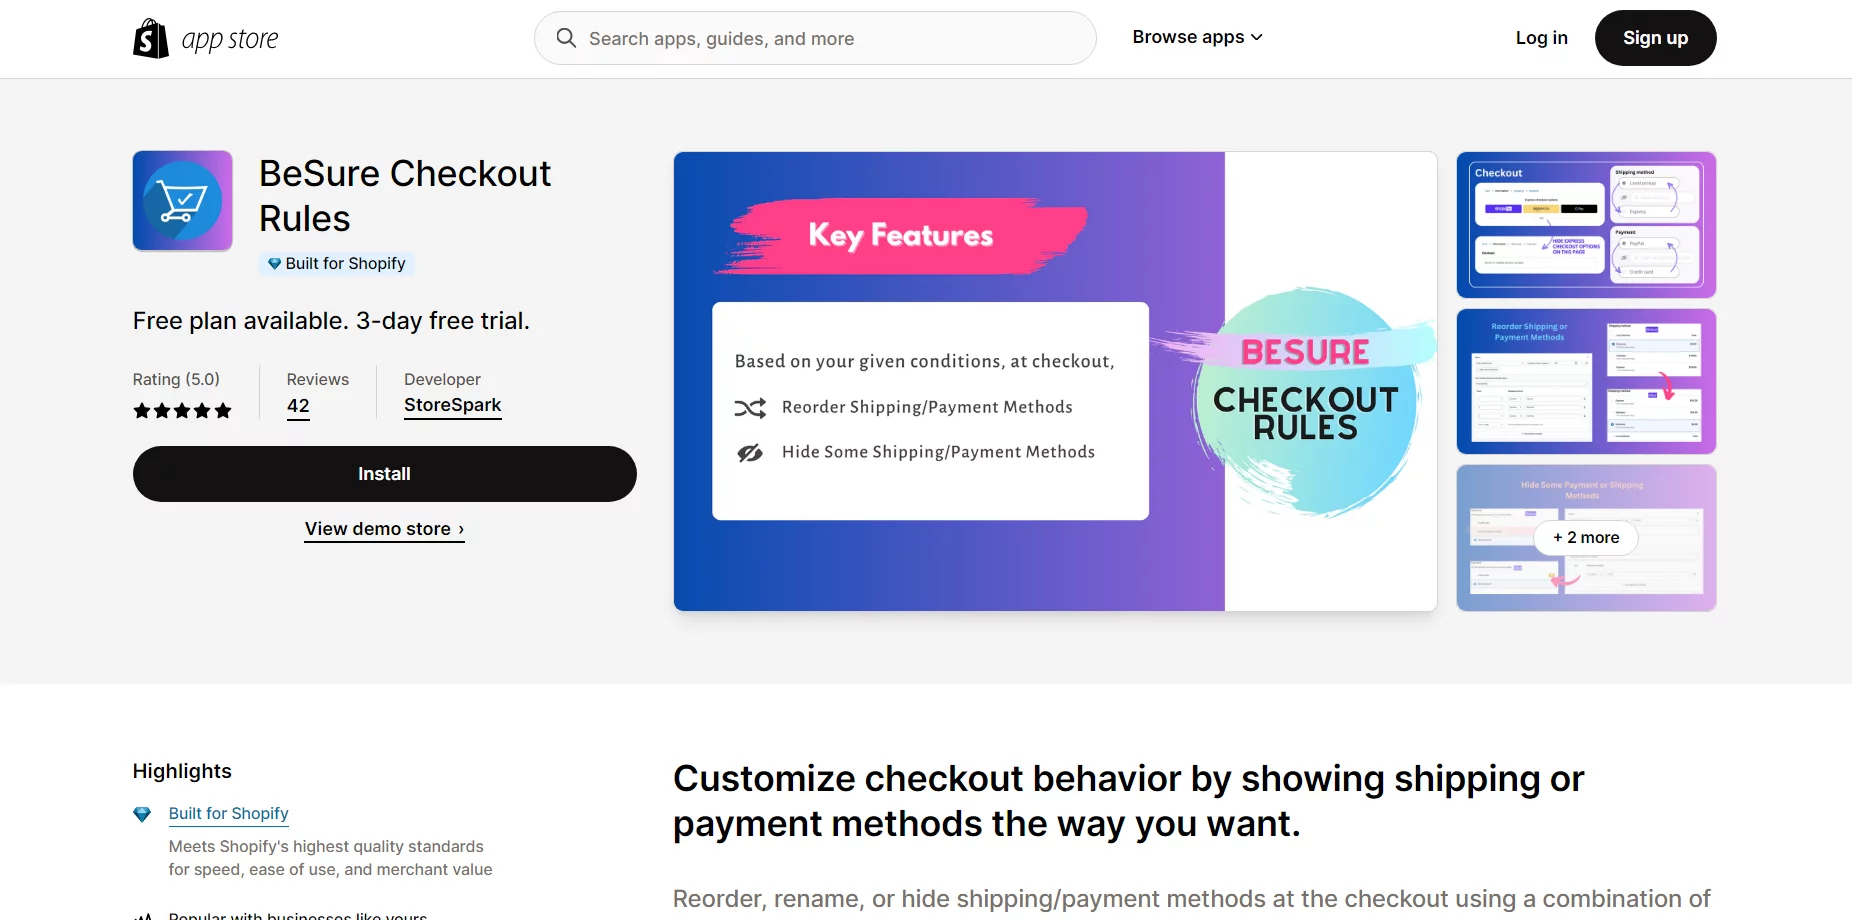 Best Shopify Checkout Apps: BeSure Checkout Rules